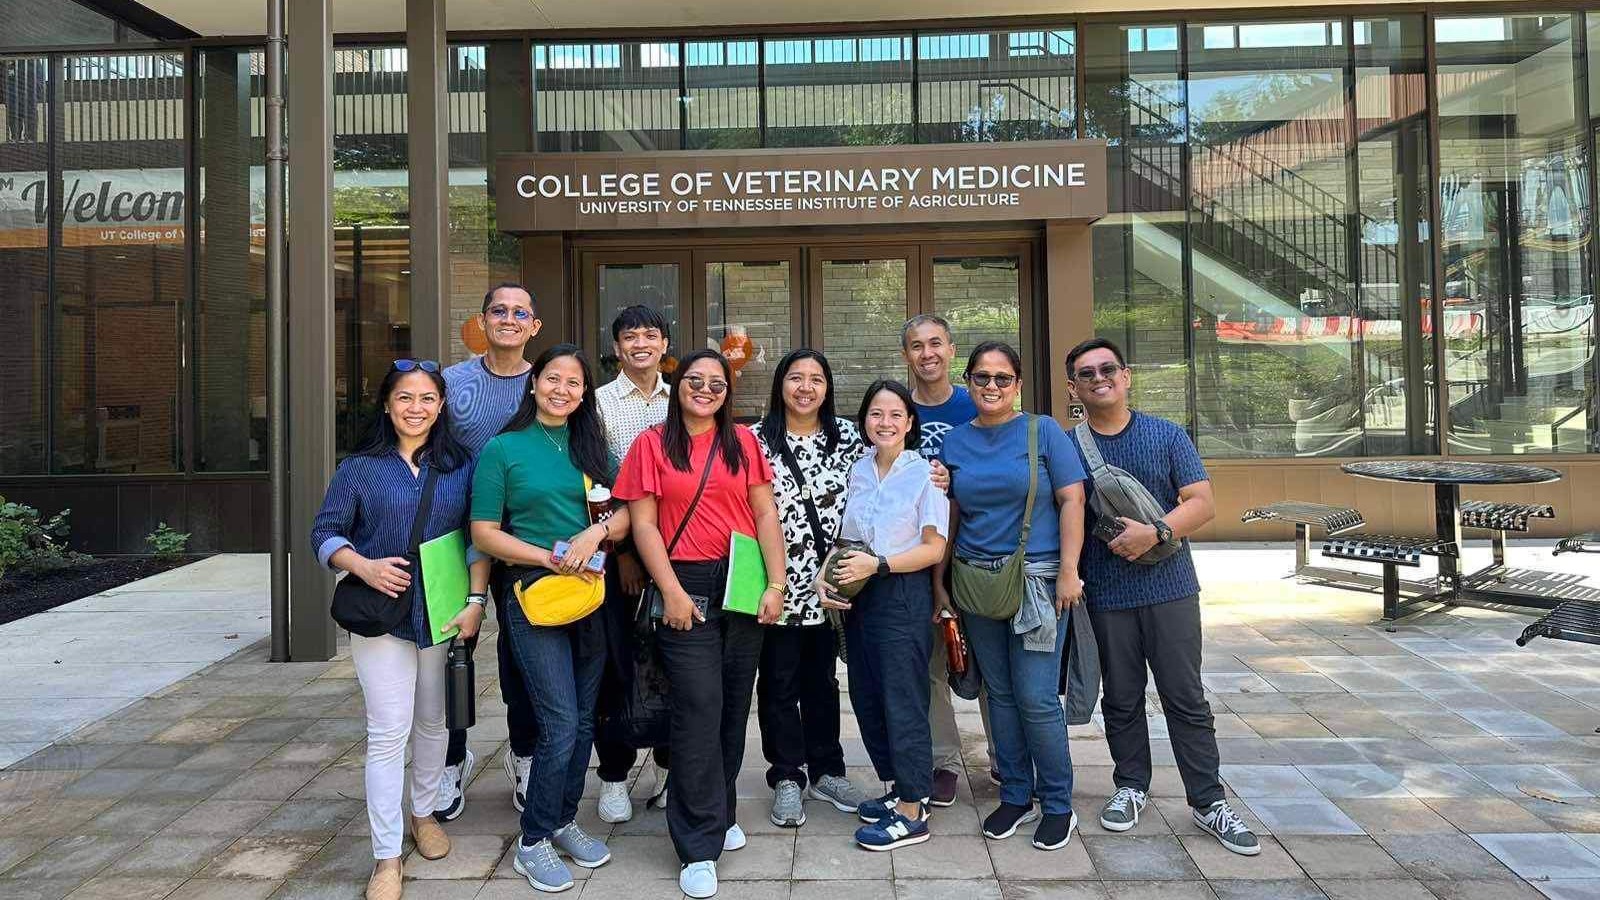 Group of 11 people standing outside the College of Veterinary Medicine